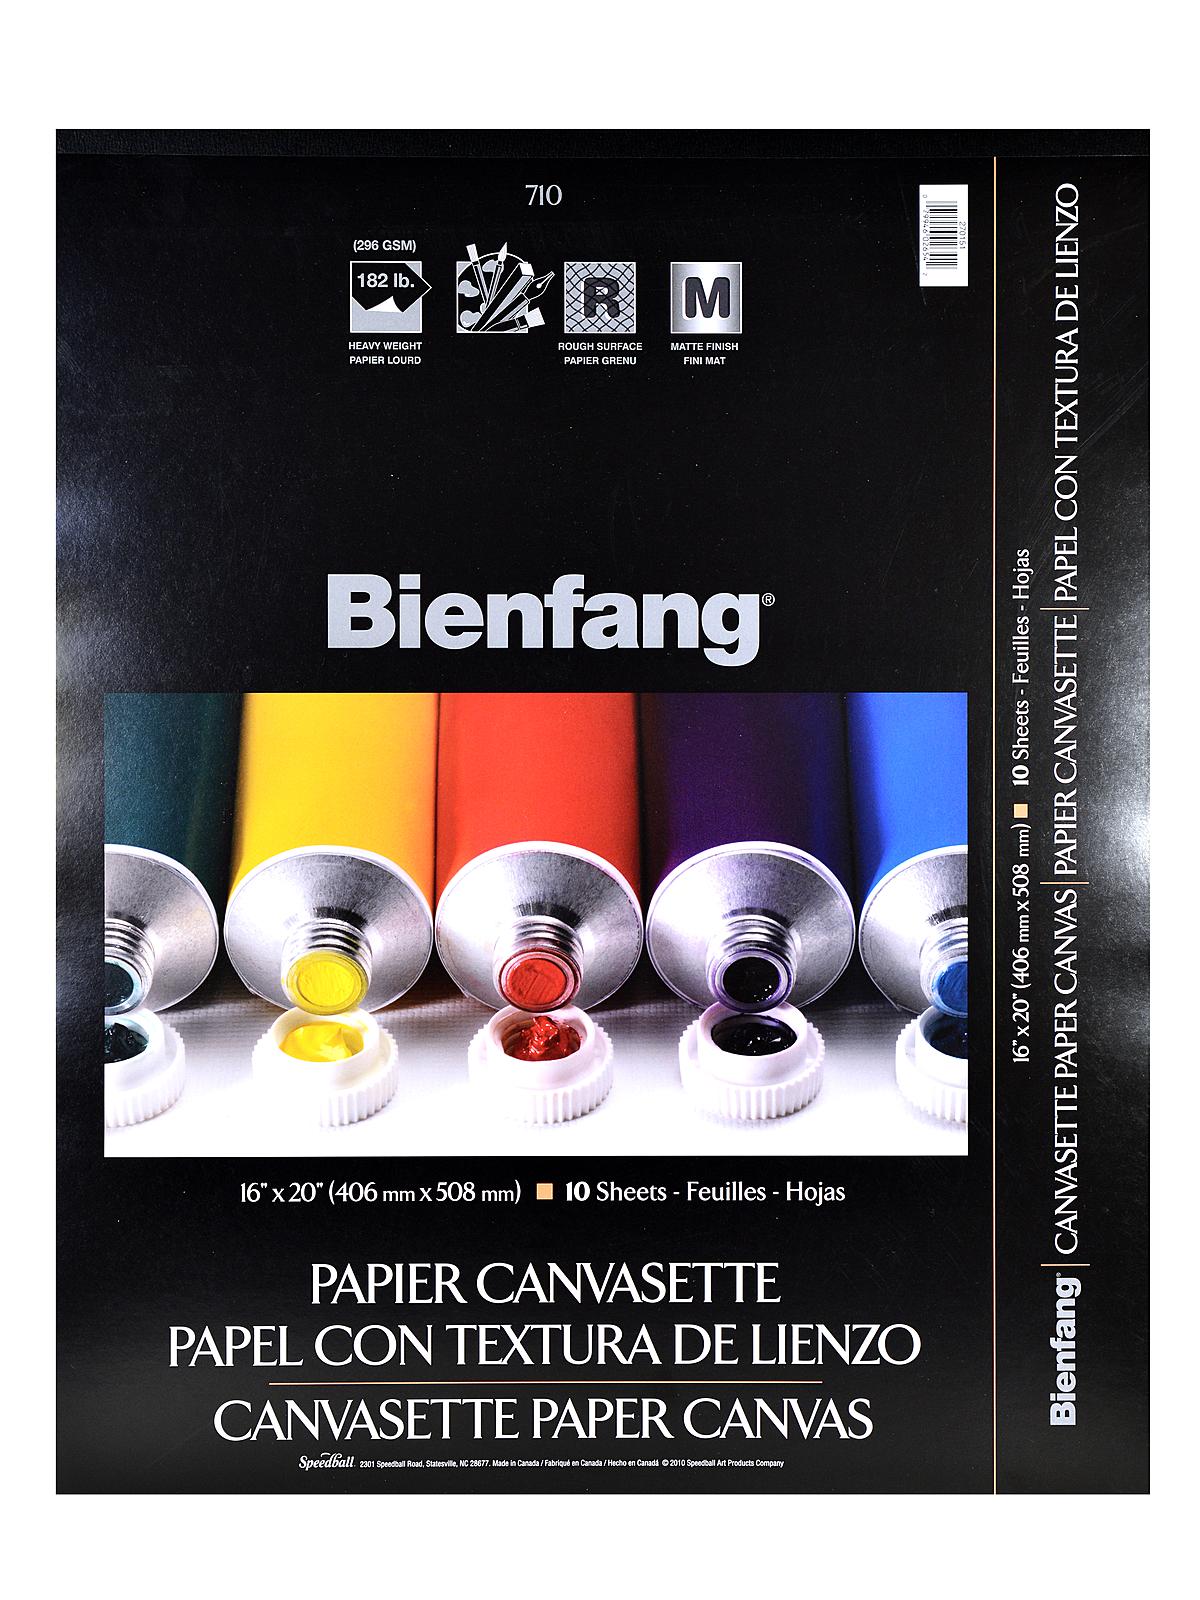 Canvasette Paper Canvas 16 In. X 20 In. Pad Of 10 Sheets